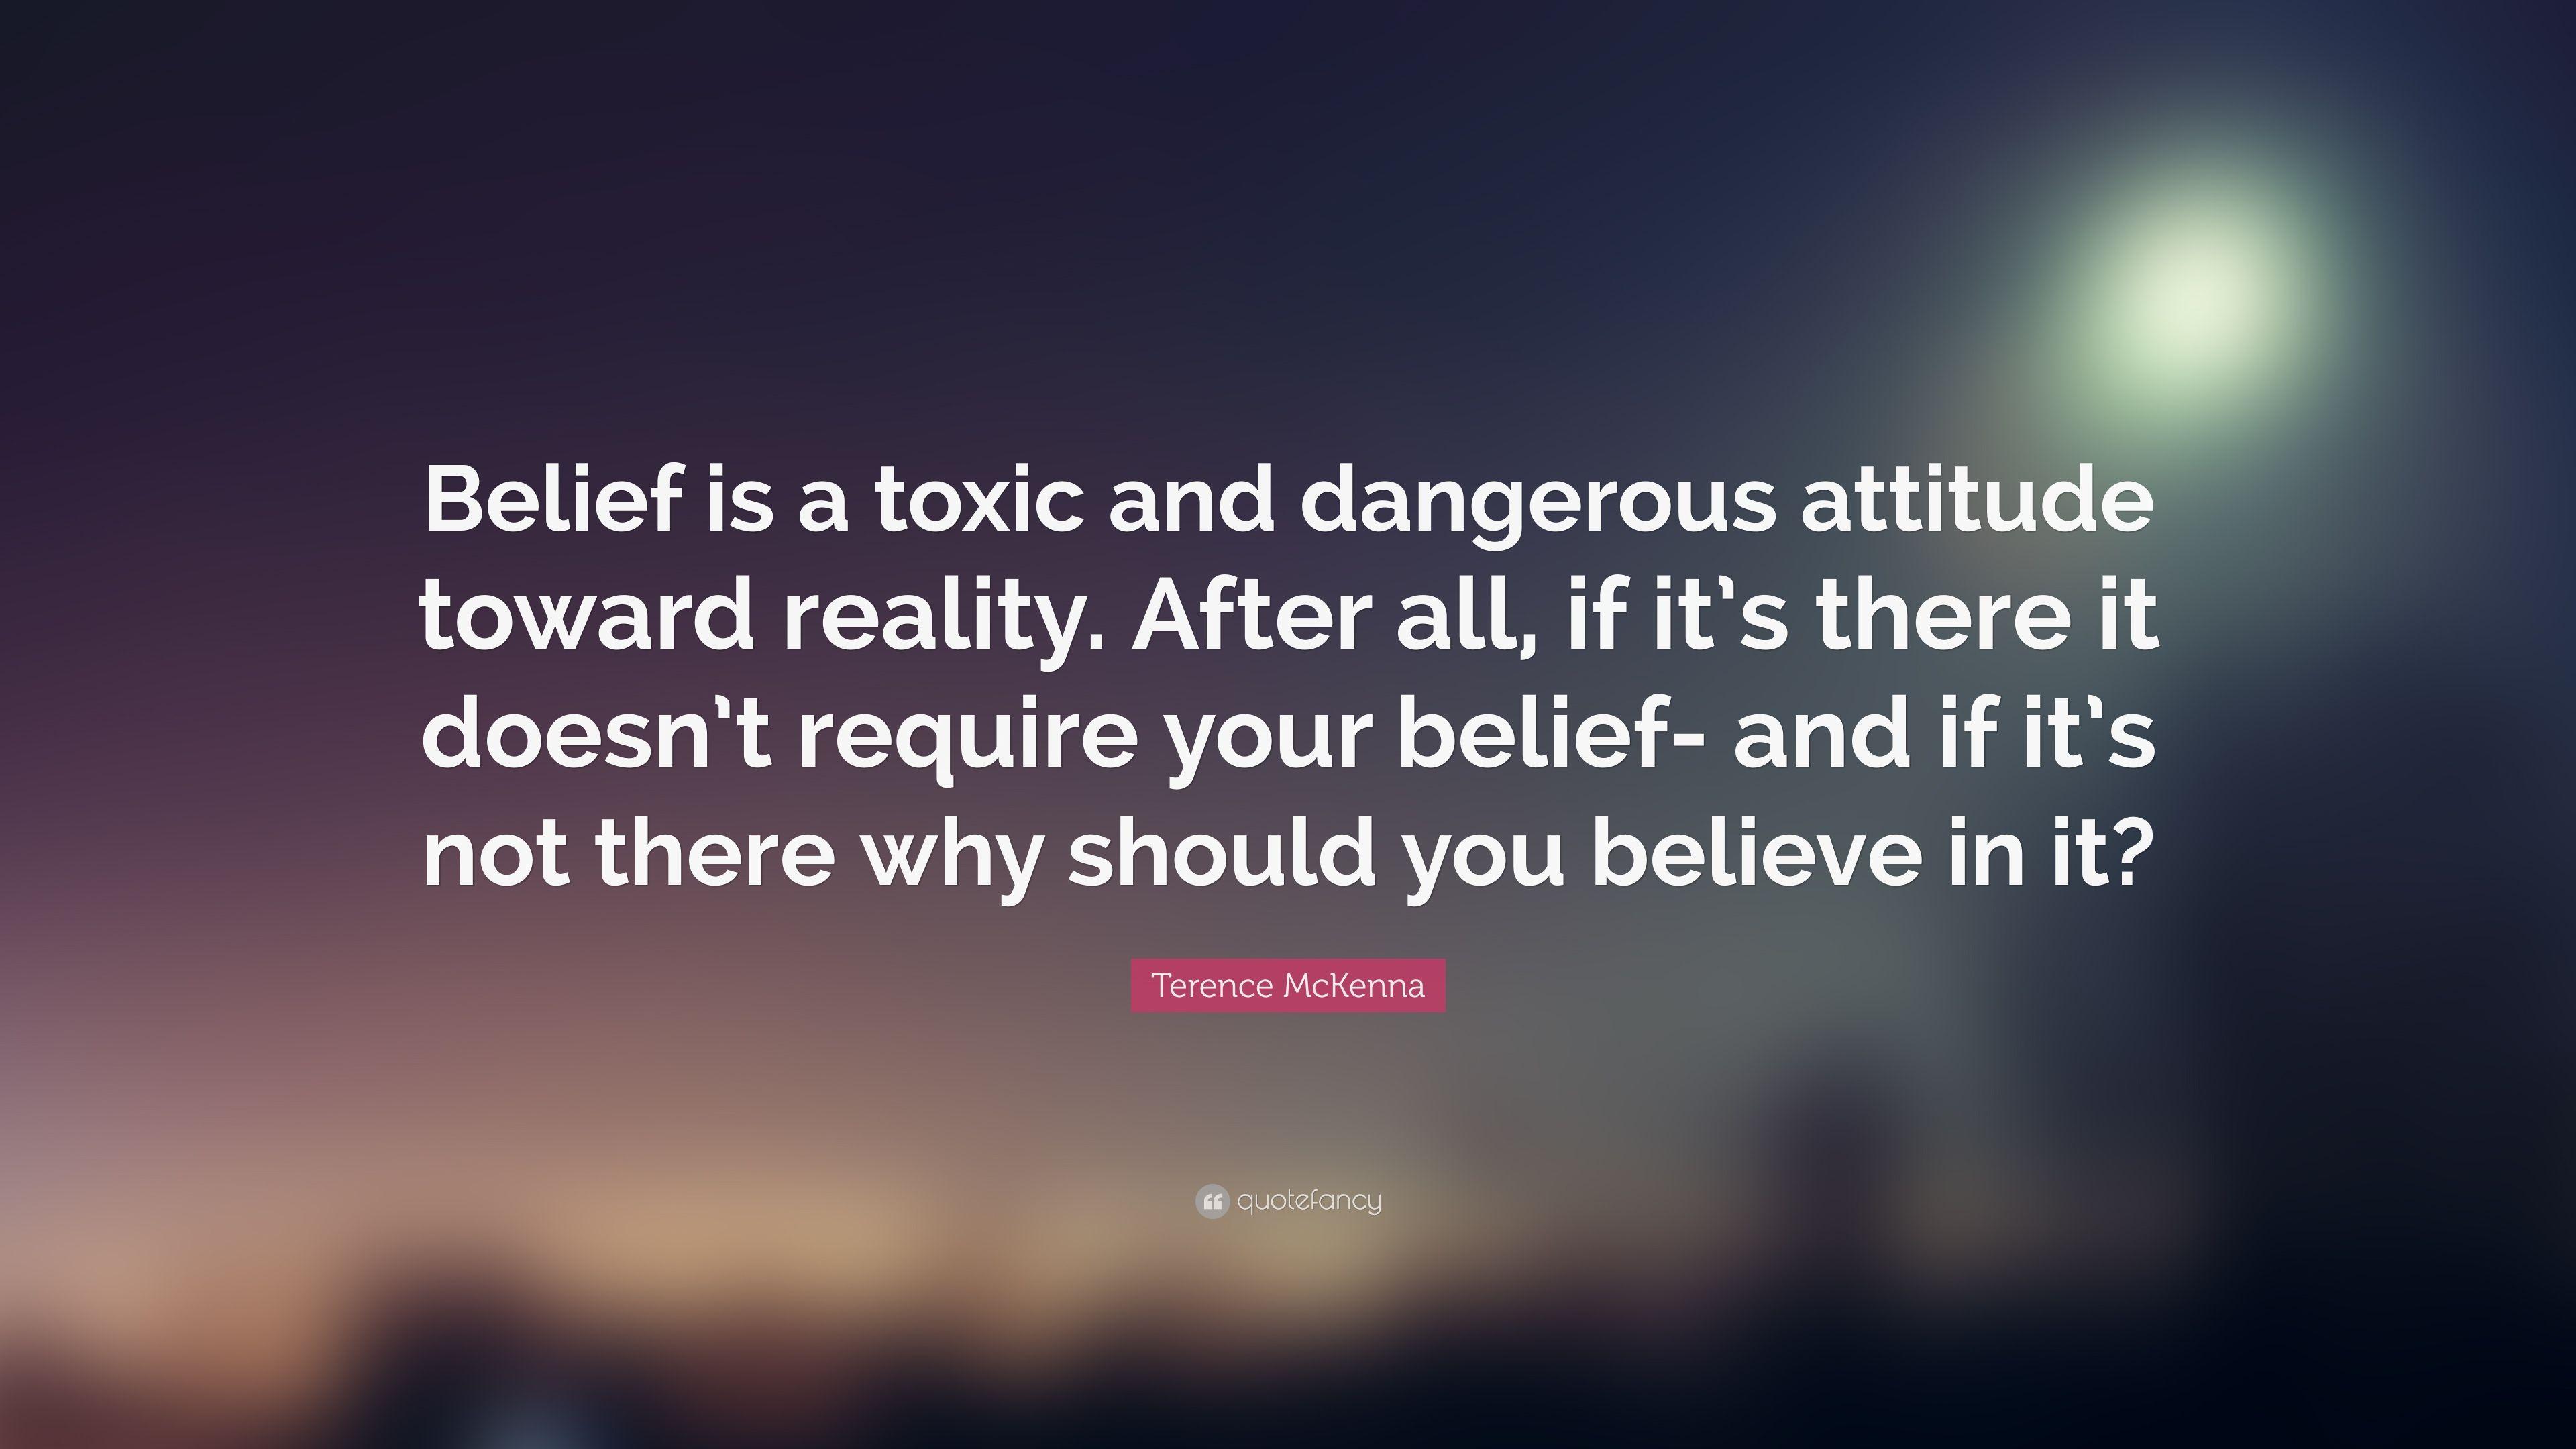 Terence McKenna Quote: “Belief is a toxic and dangerous attitude